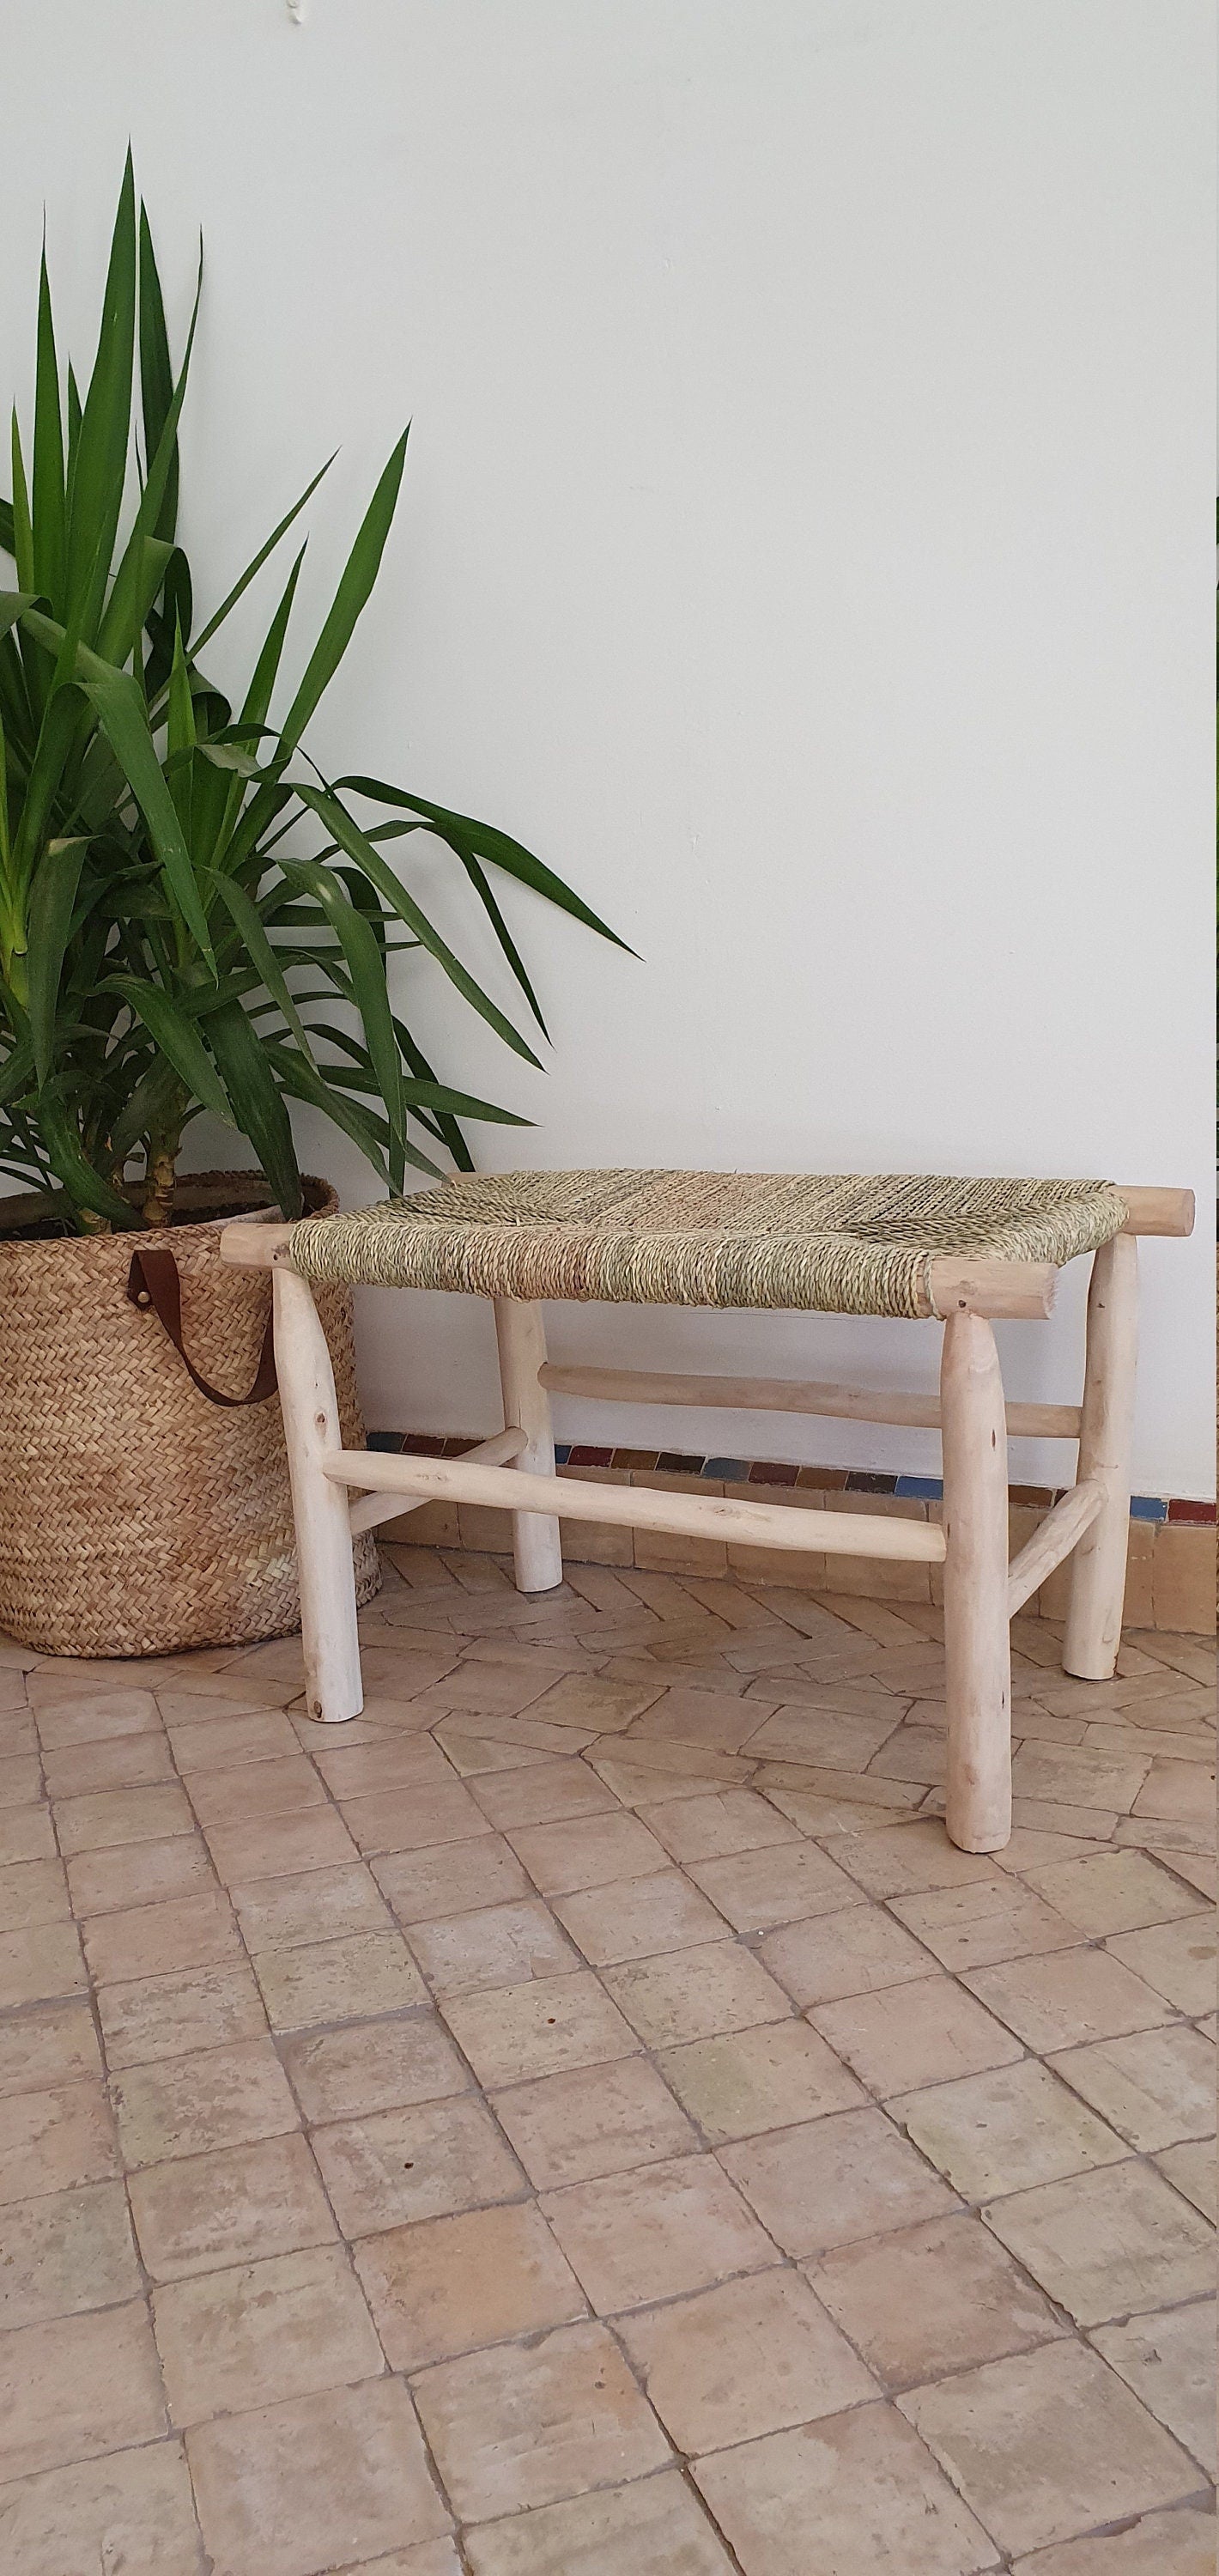 Solid wood Moroccan bench with intricate woven design